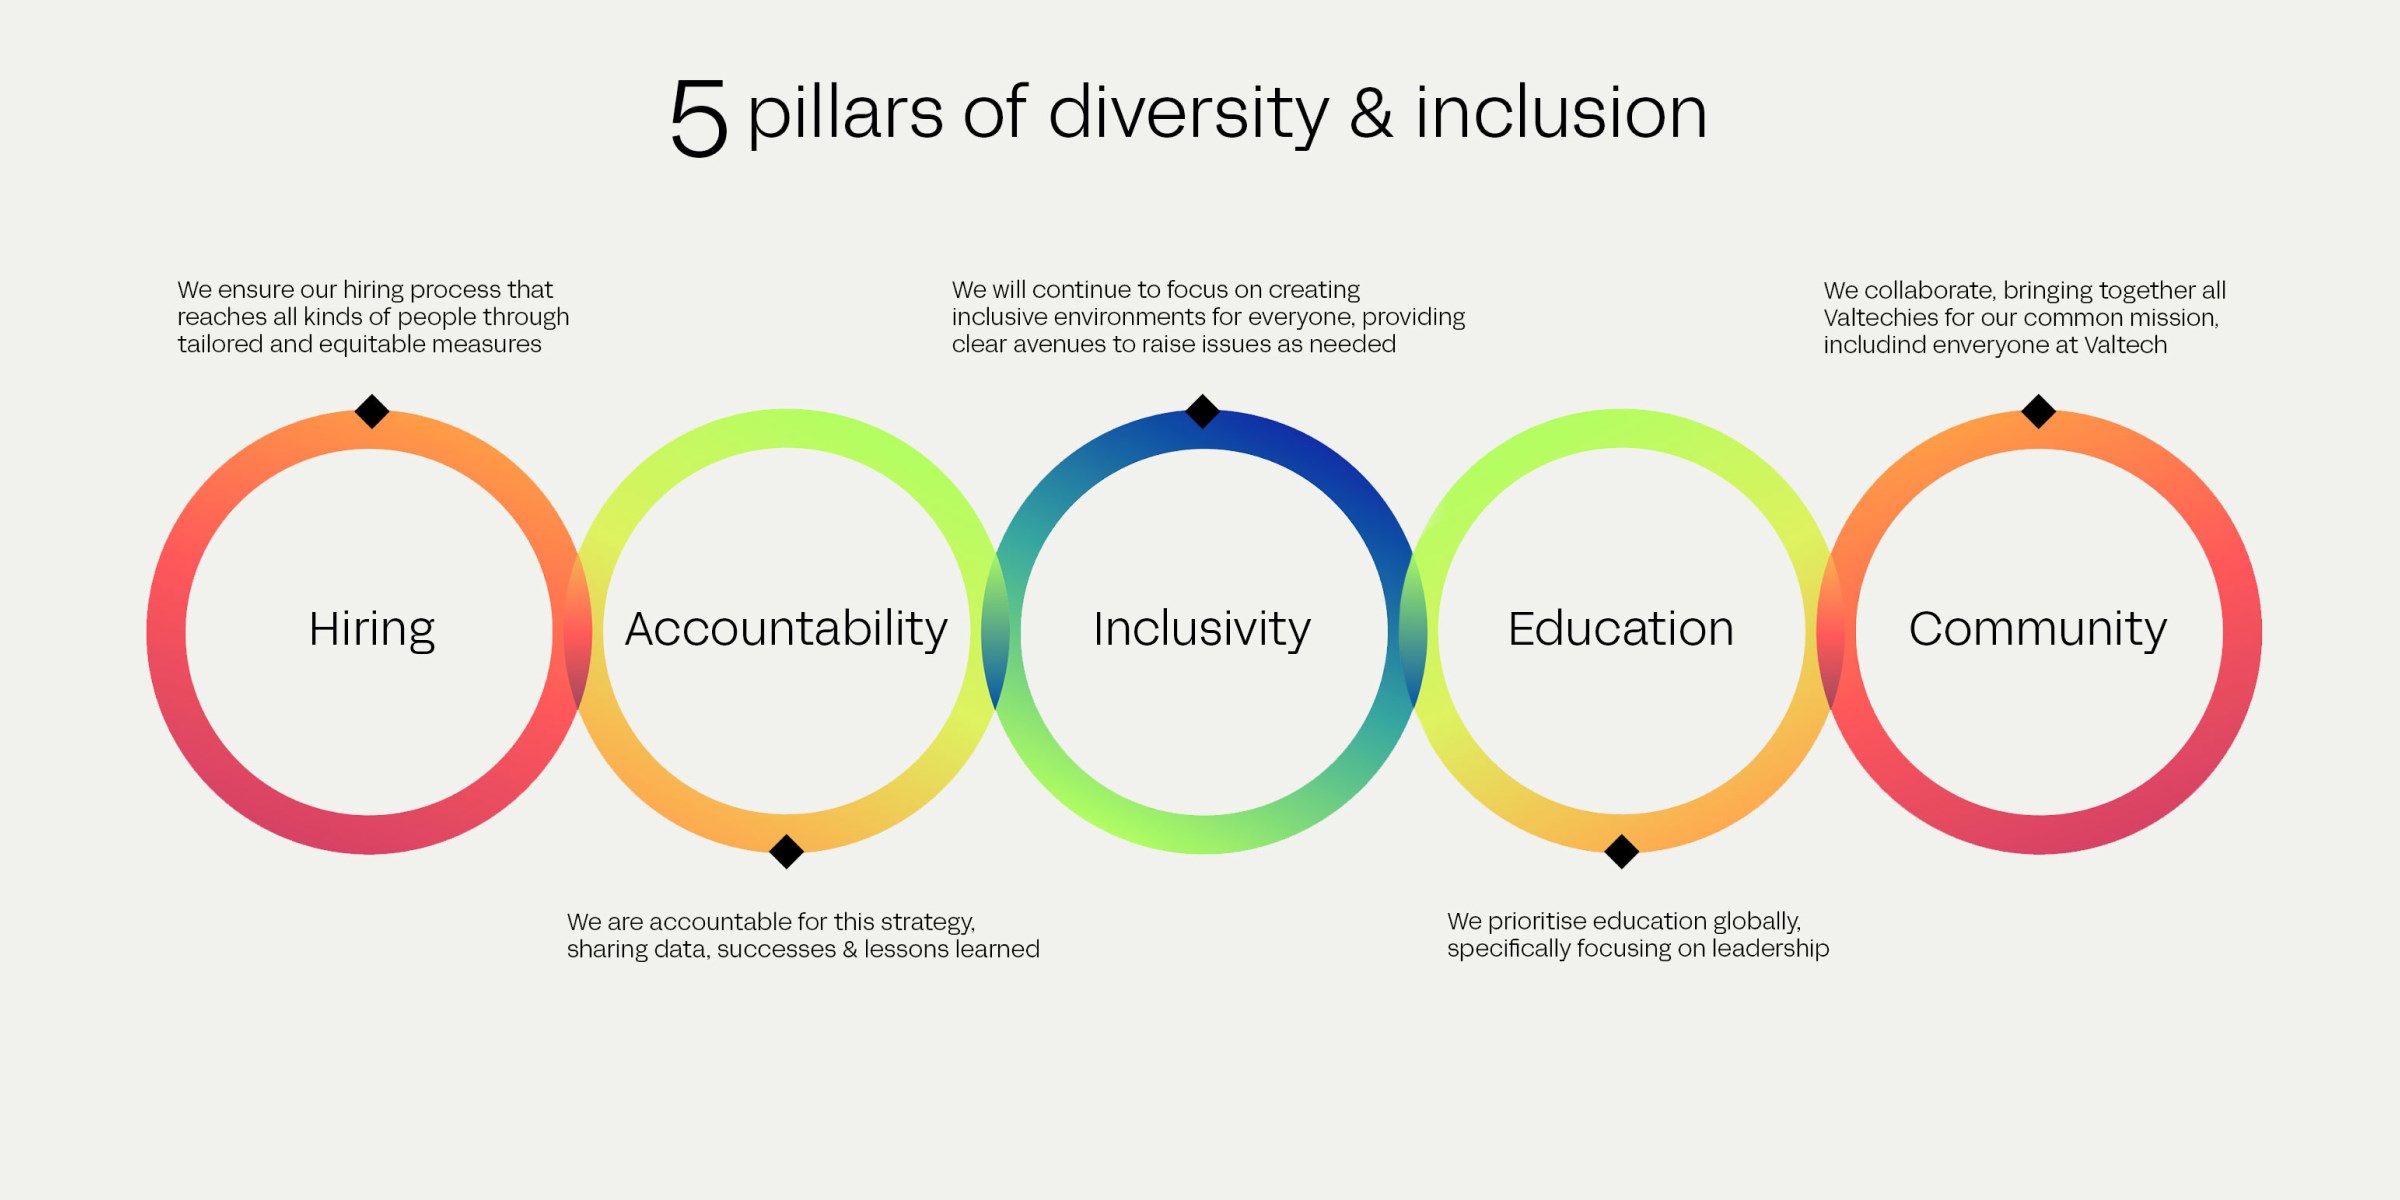 VT 5 pillars. Each pillar has a multicoloured circle. Hiring :We ensure our hiring process reaches many types of people through tailored and equitable measures. Accountability: We are accountable for this strategy, sharing data, successes and lessons learned. Inclusivity: We will continue to focus on creating inclusive environments for everyone, providing clear avenues to raise issues as needed. Community: We collaborate, bringing together everyone at Valtech for our common mission. Education: We prioritize education globally, specifically focusing on leadership